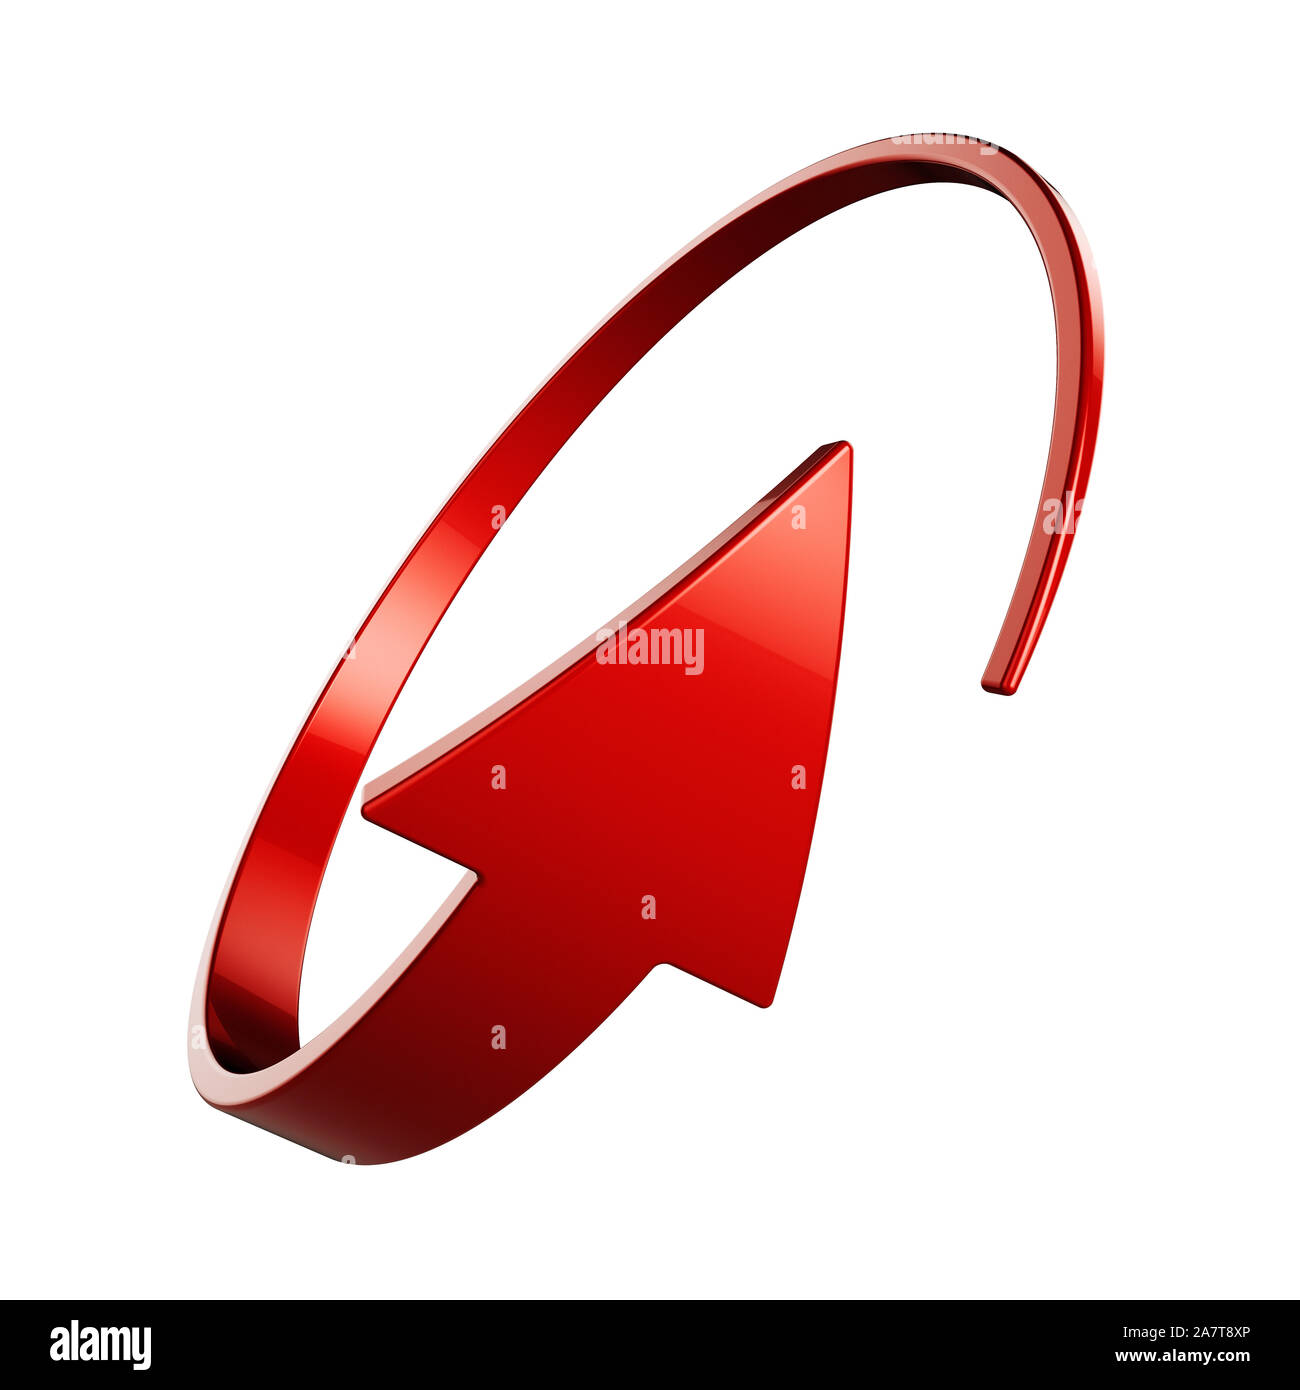 3d illustration of red round arrow on white background Stock Photo